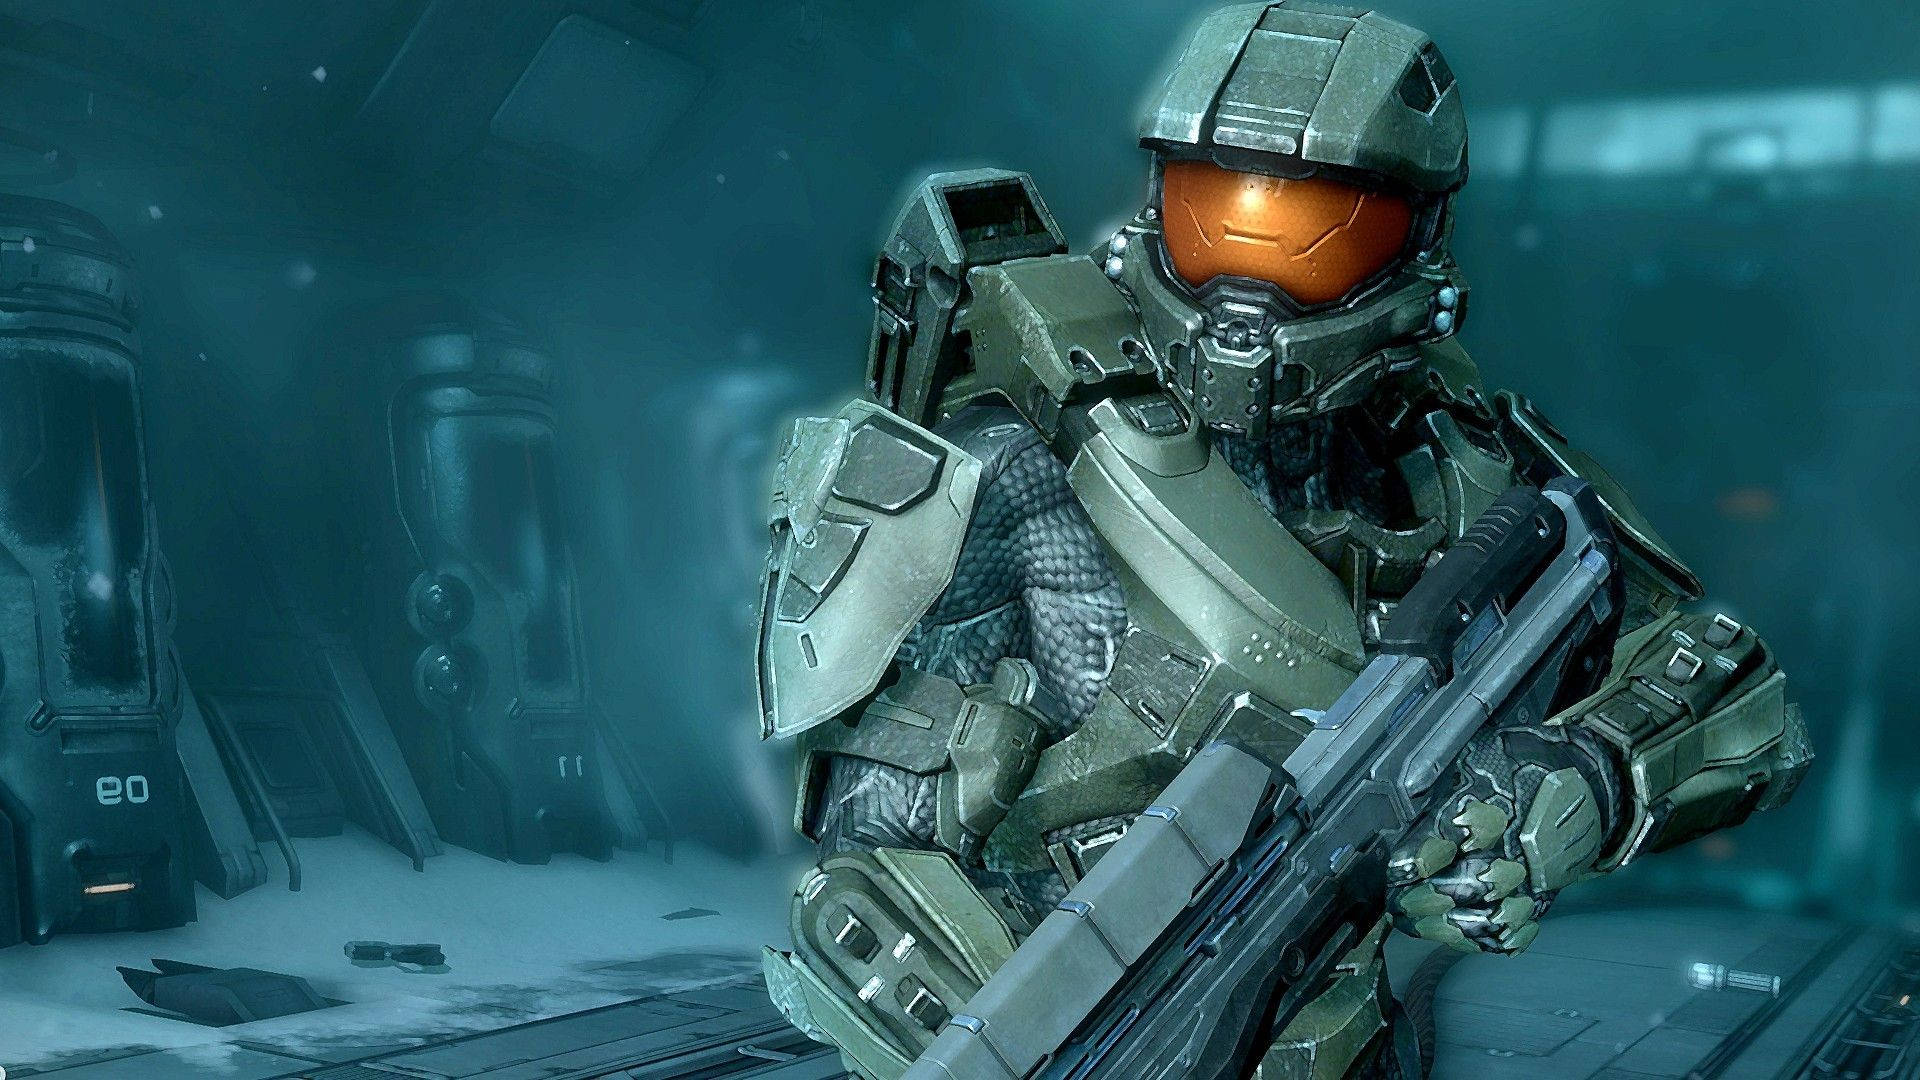 Master Chief Inside A Spaceship Wallpaper